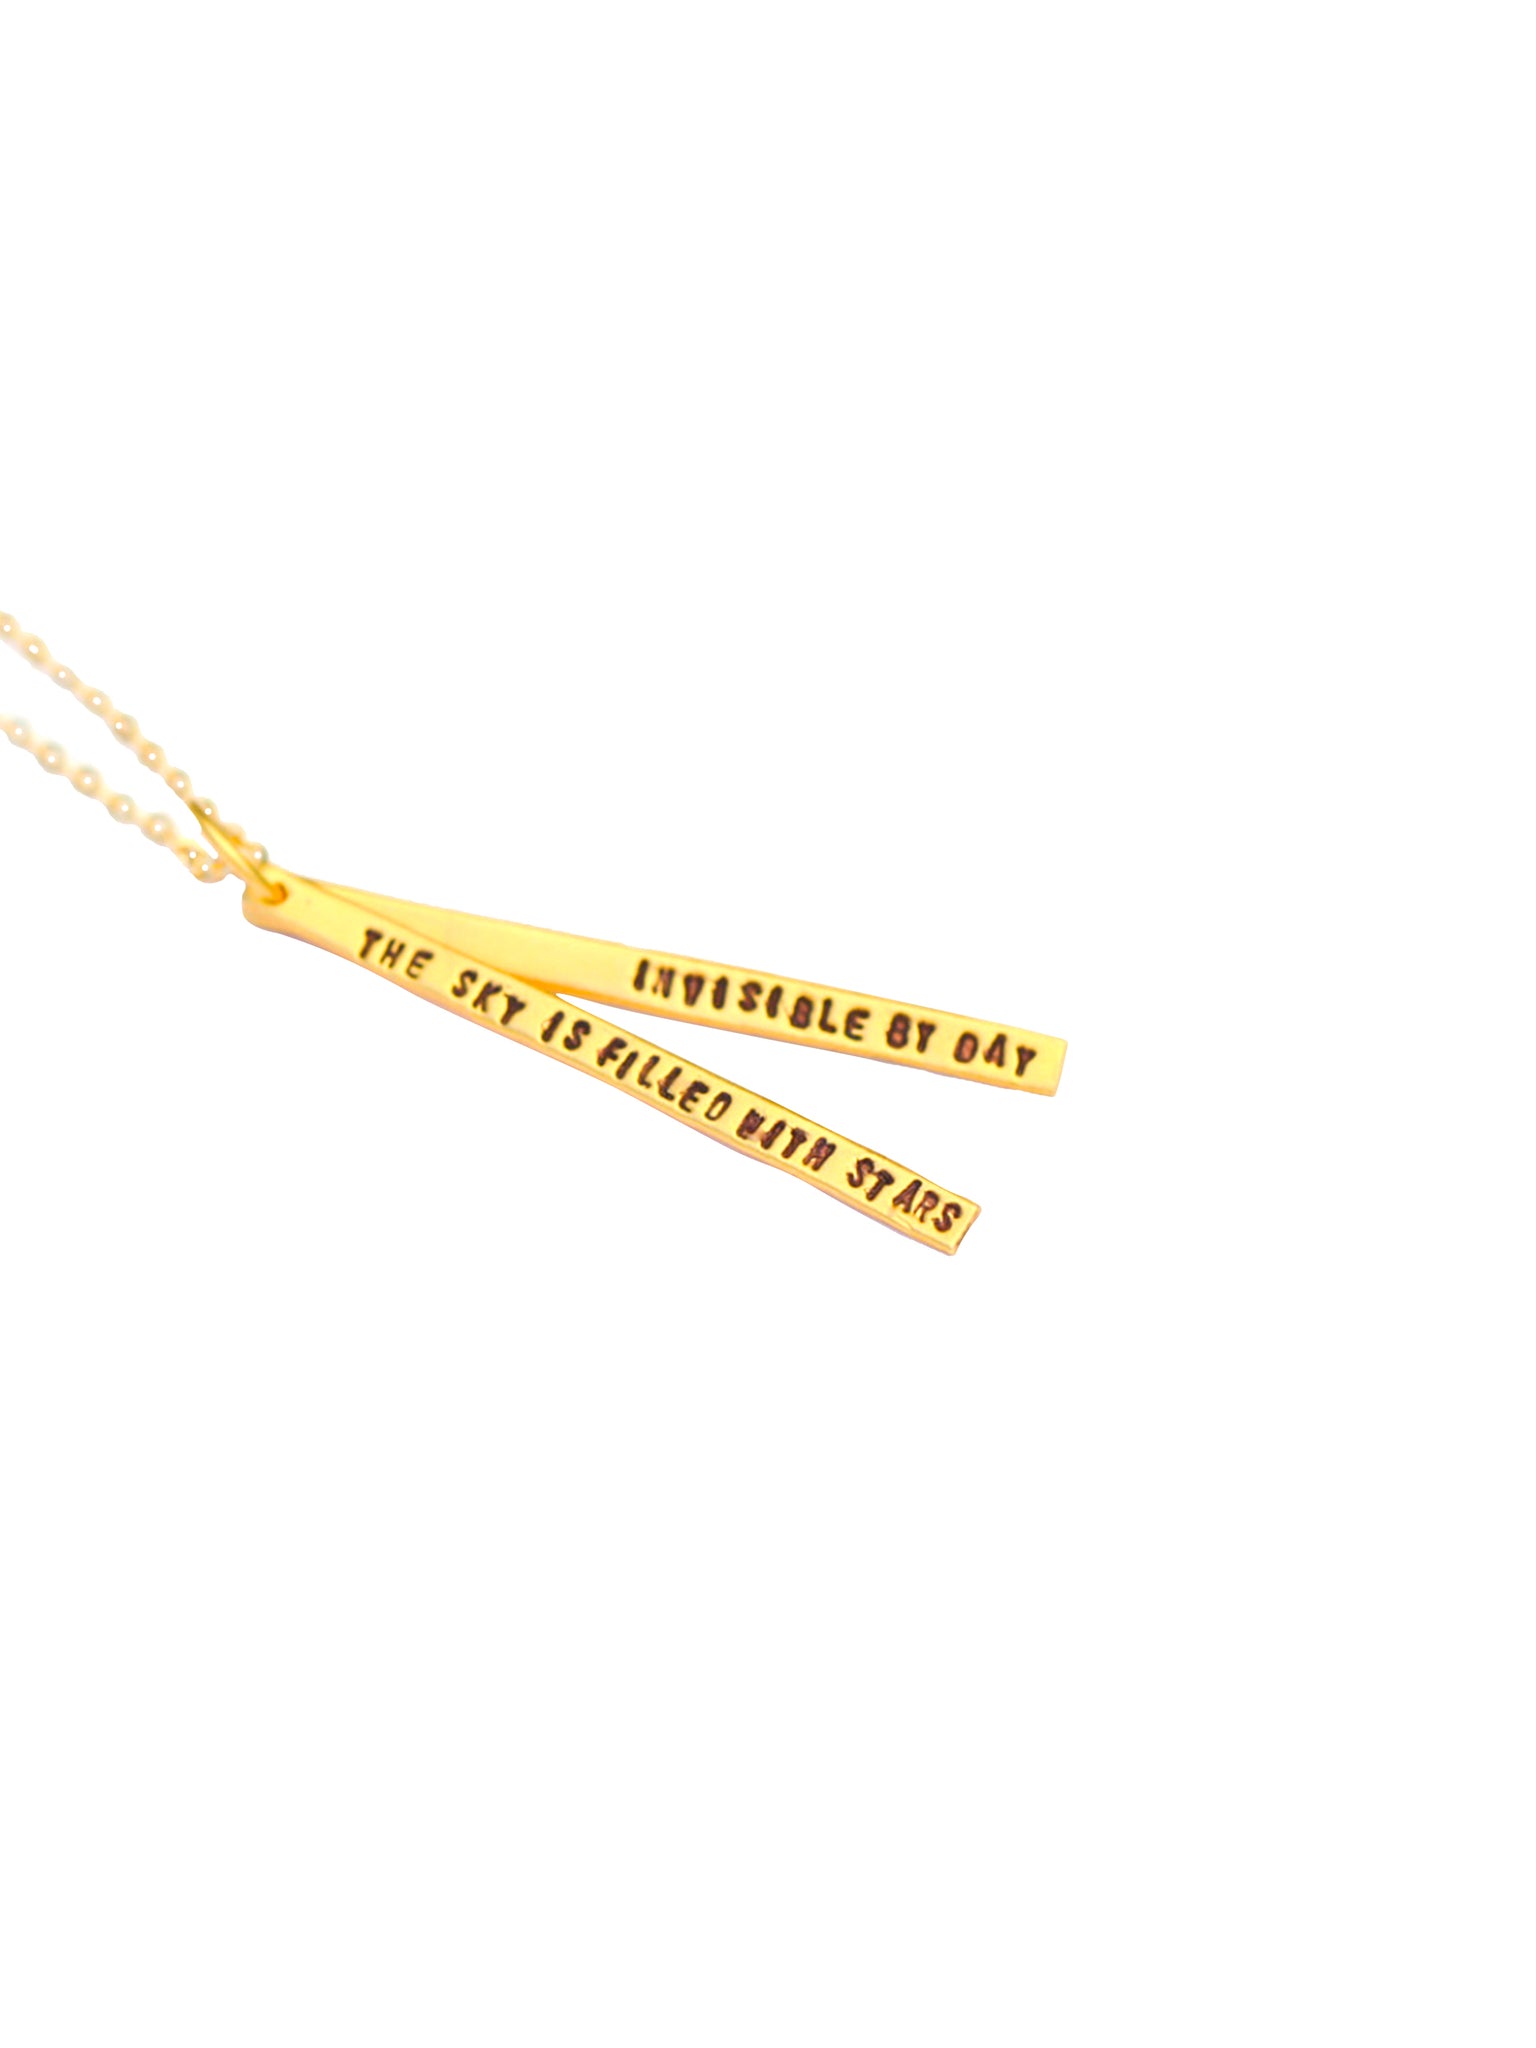 Chocolate & Steel Long-Bar Quote Necklace Henry Wadsworth Longfellow Gold Weston Table